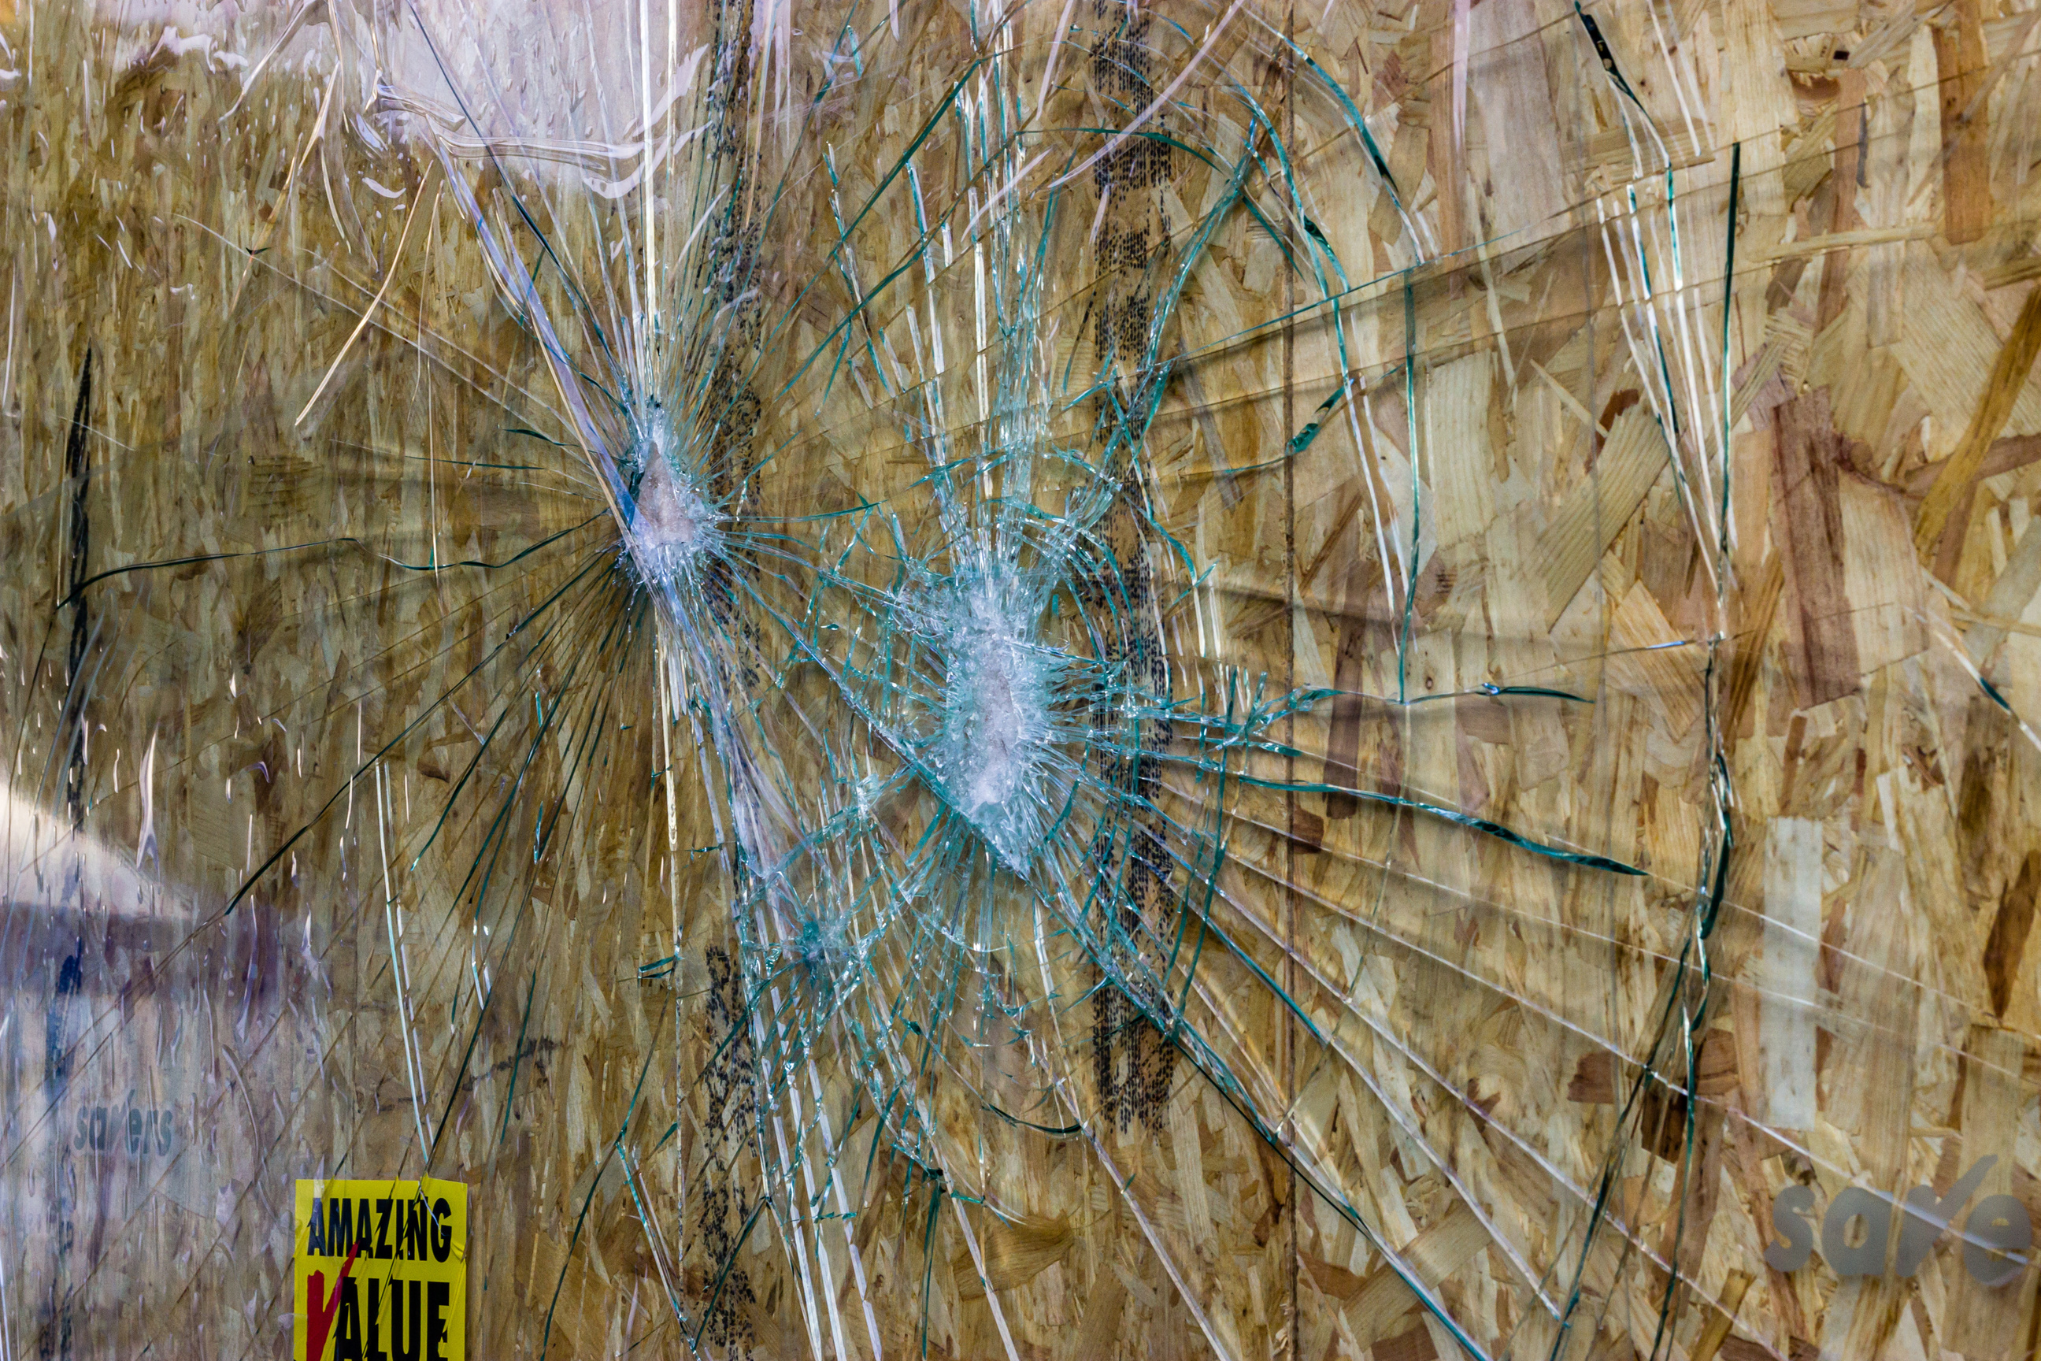 How Big is the Smash & Grab Crime Problem in the U.S.?